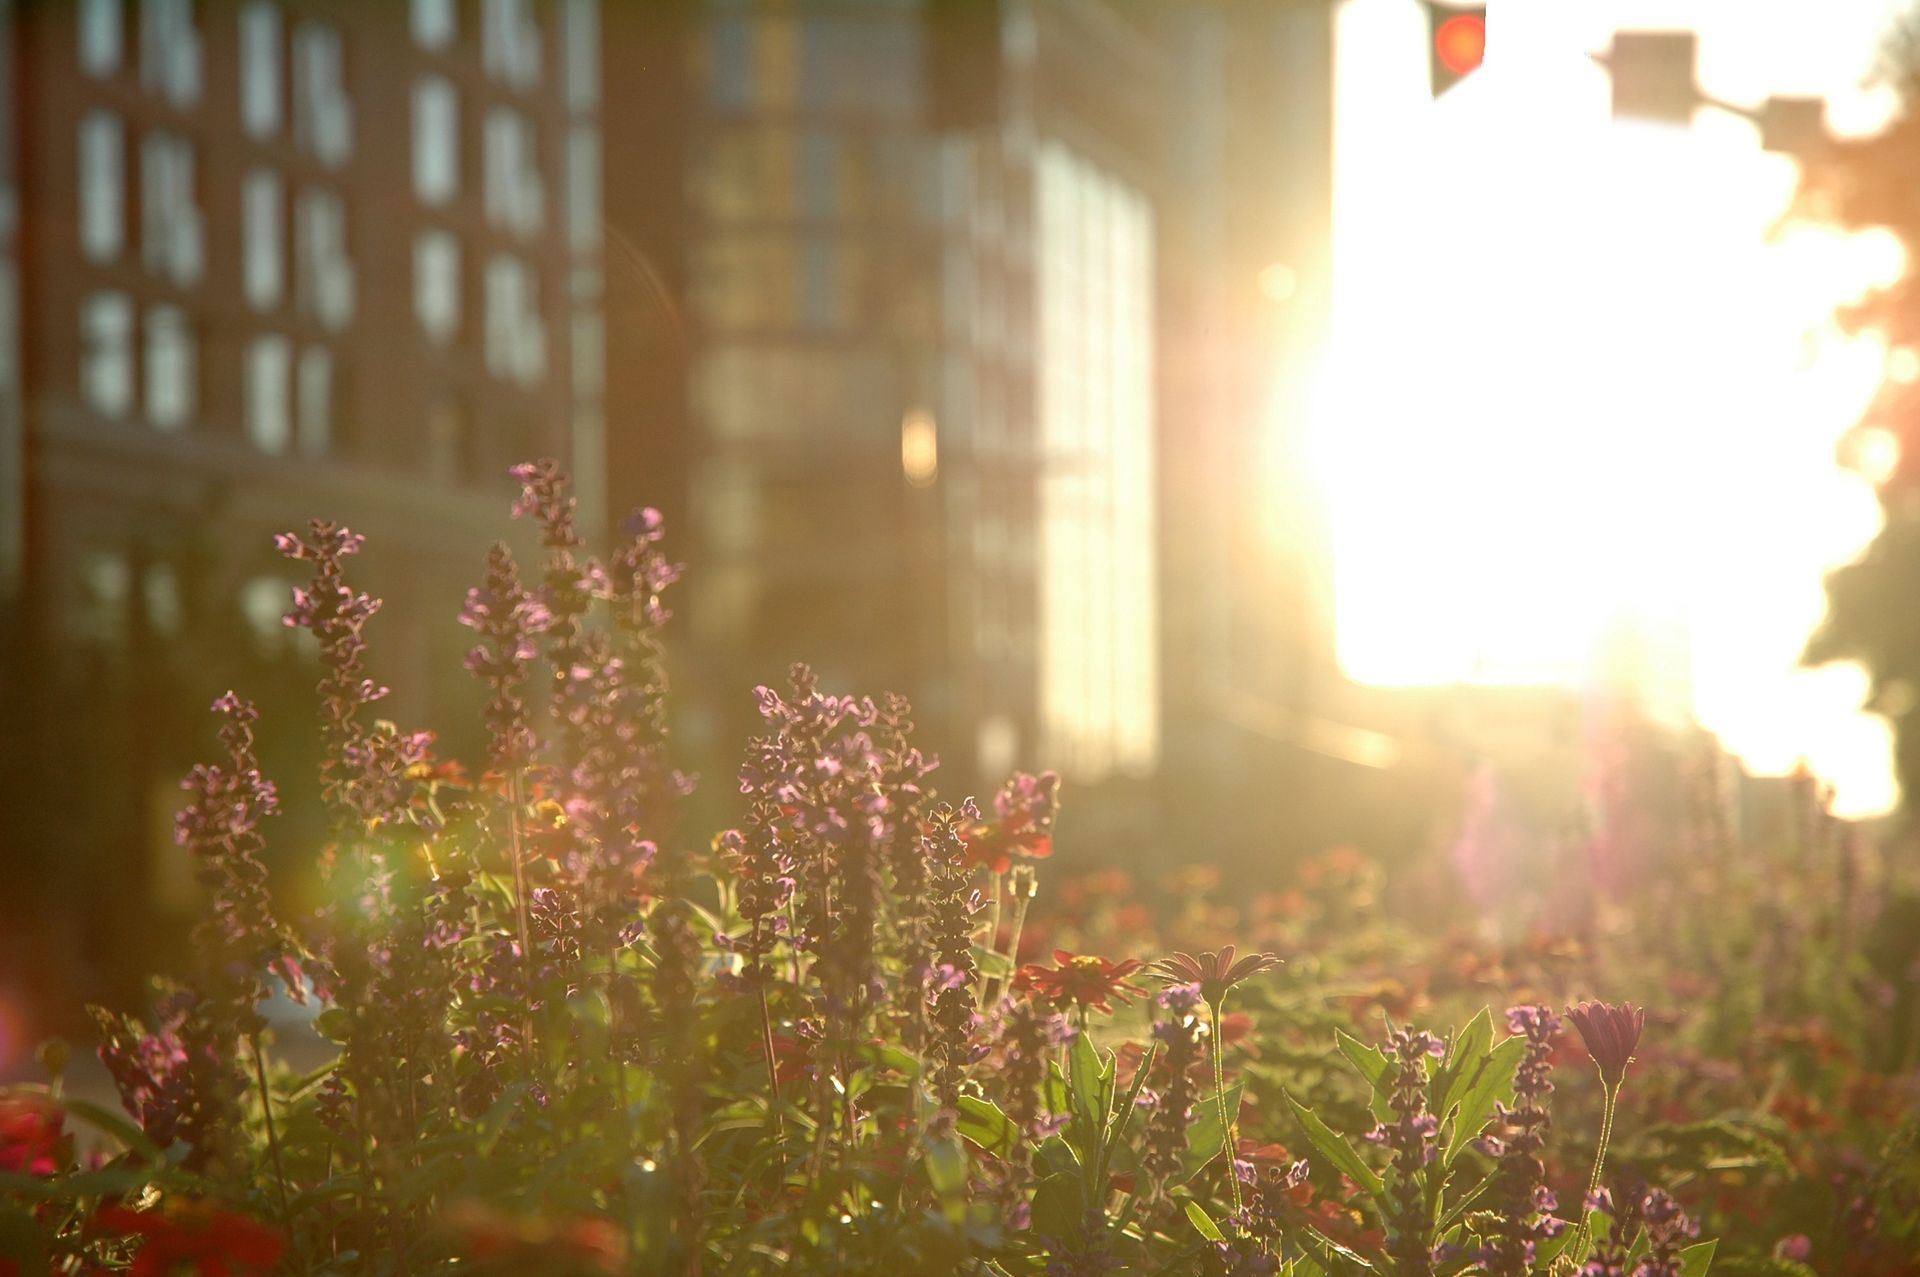 A garden of flowers with a sun flare in the background.